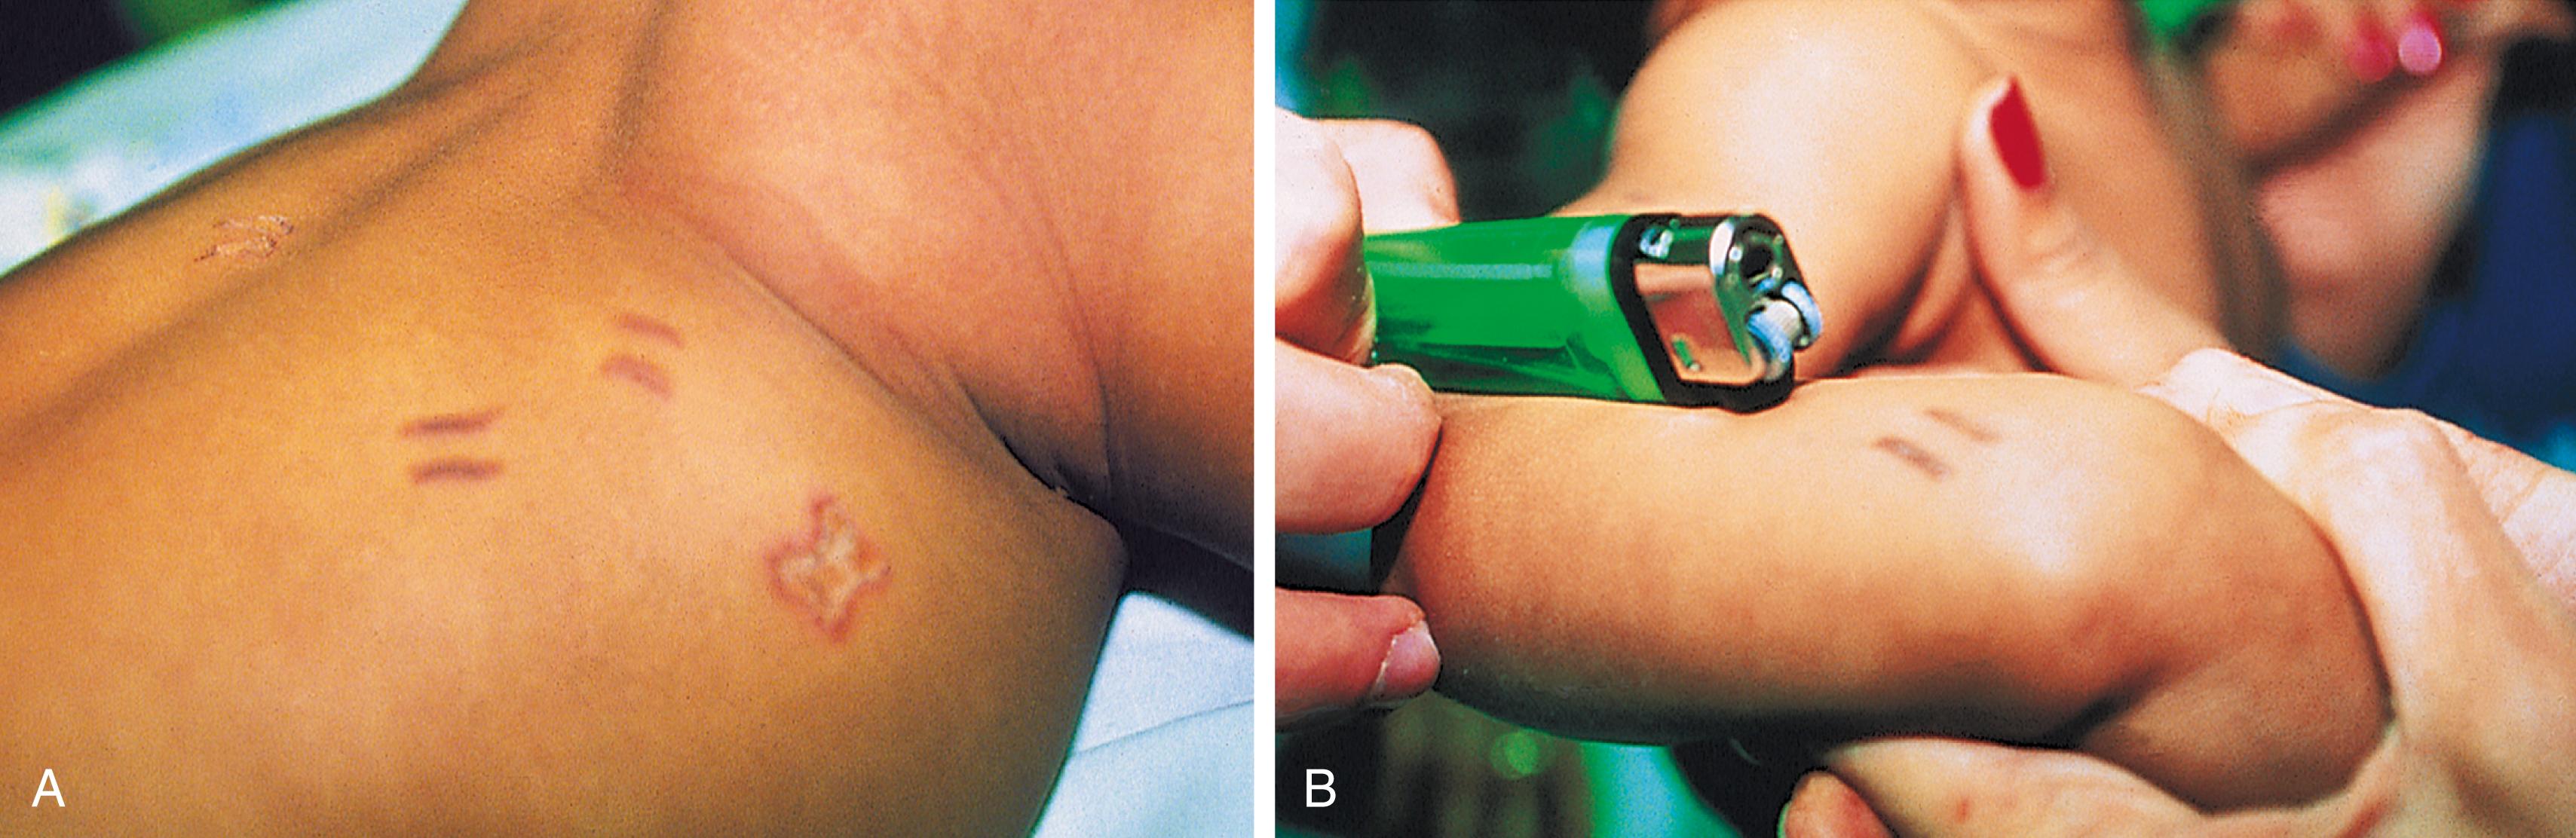 Fig. 6.19, Cigarette lighter burns. (A) Two pairs of lesions with the appearance of parallel serrated lines and a deep burn in the shape of a butterfly were found on examining this infant, who was brought to the emergency department for treatment of a rash. (B) Astute deduction by a resident and social worker led to the discovery that heated cigarette lighter wheels had been used to inflict the burns. The full-thickness butterfly is the result of repeated application.